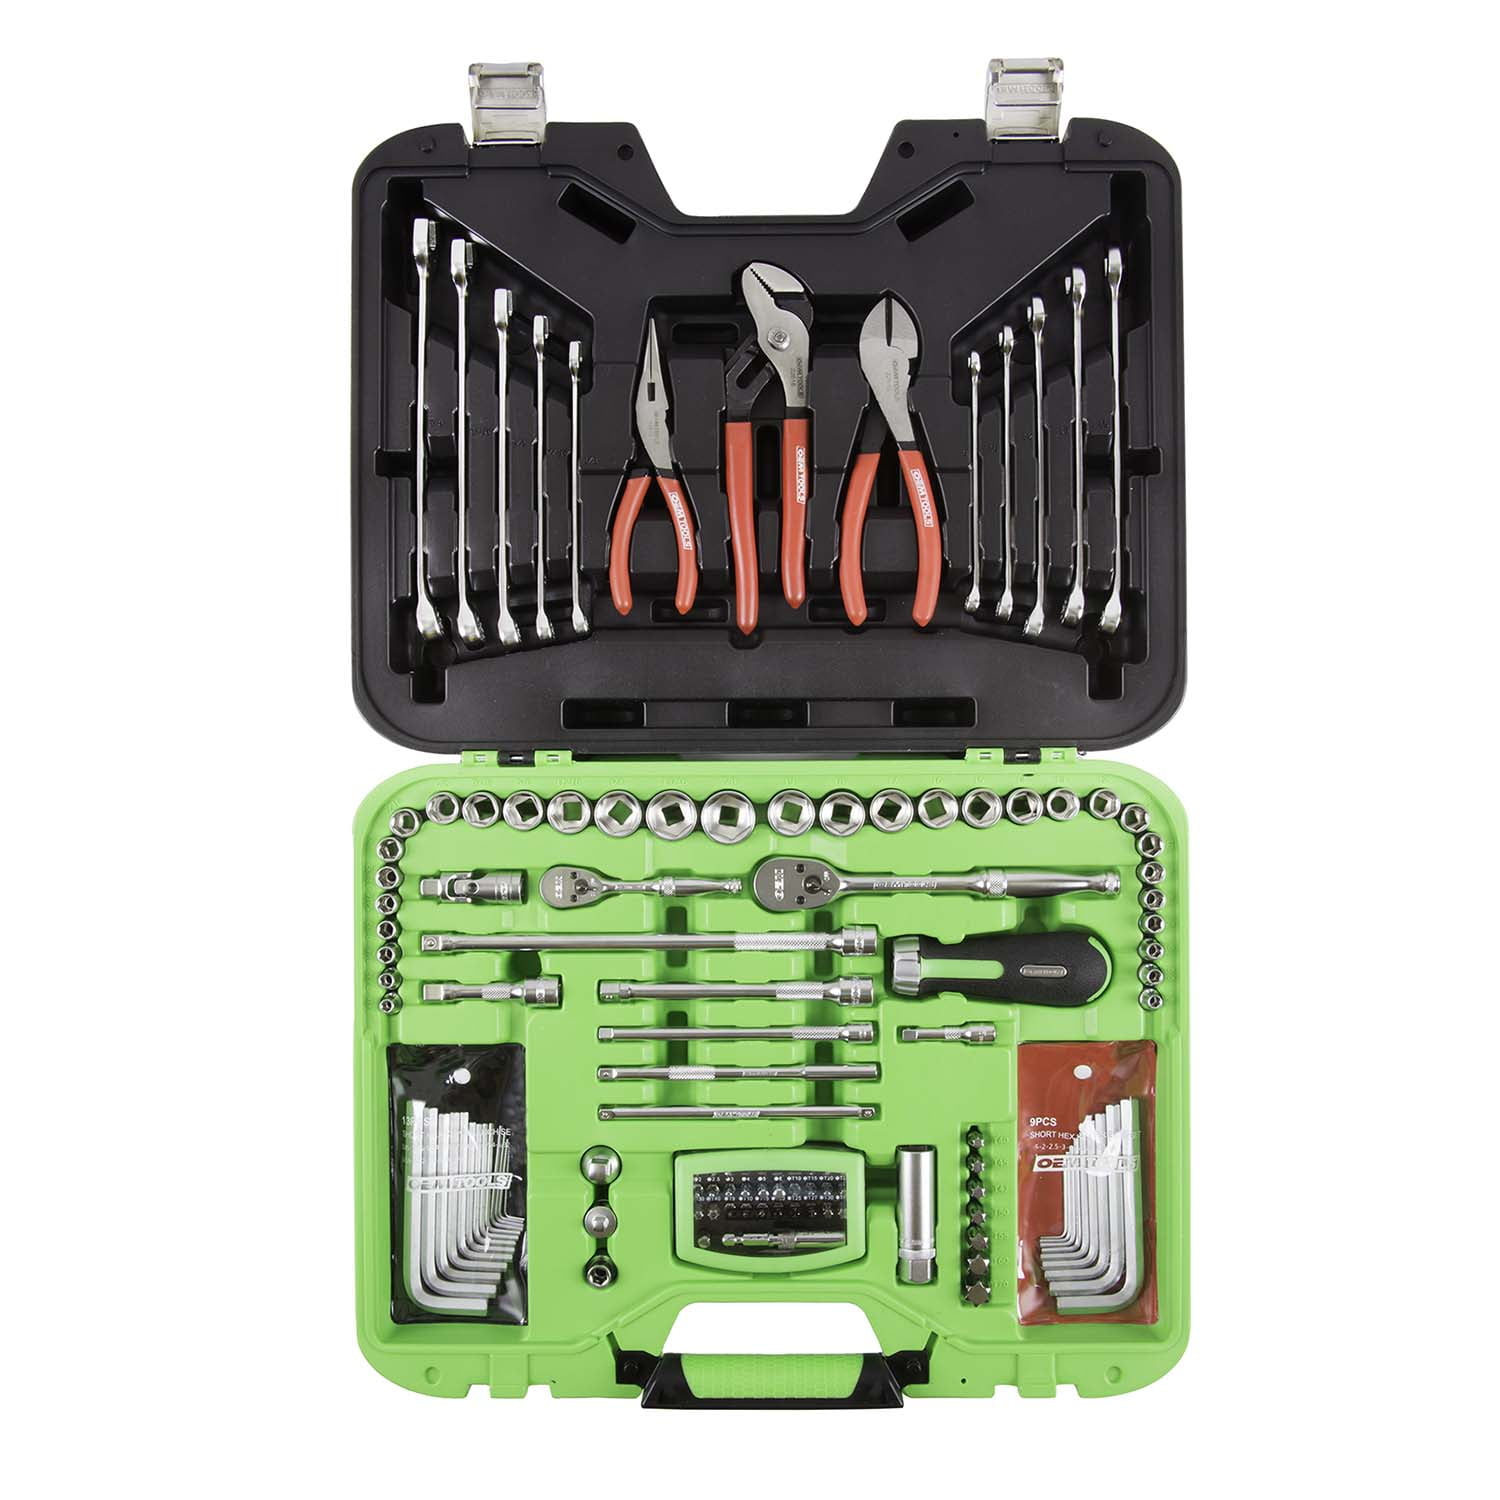 OEMTOOLS 121 Piece Mechanic's Tool Set, Vehicle Tool Kit Set, for Automotive  and DIY Home Projects 